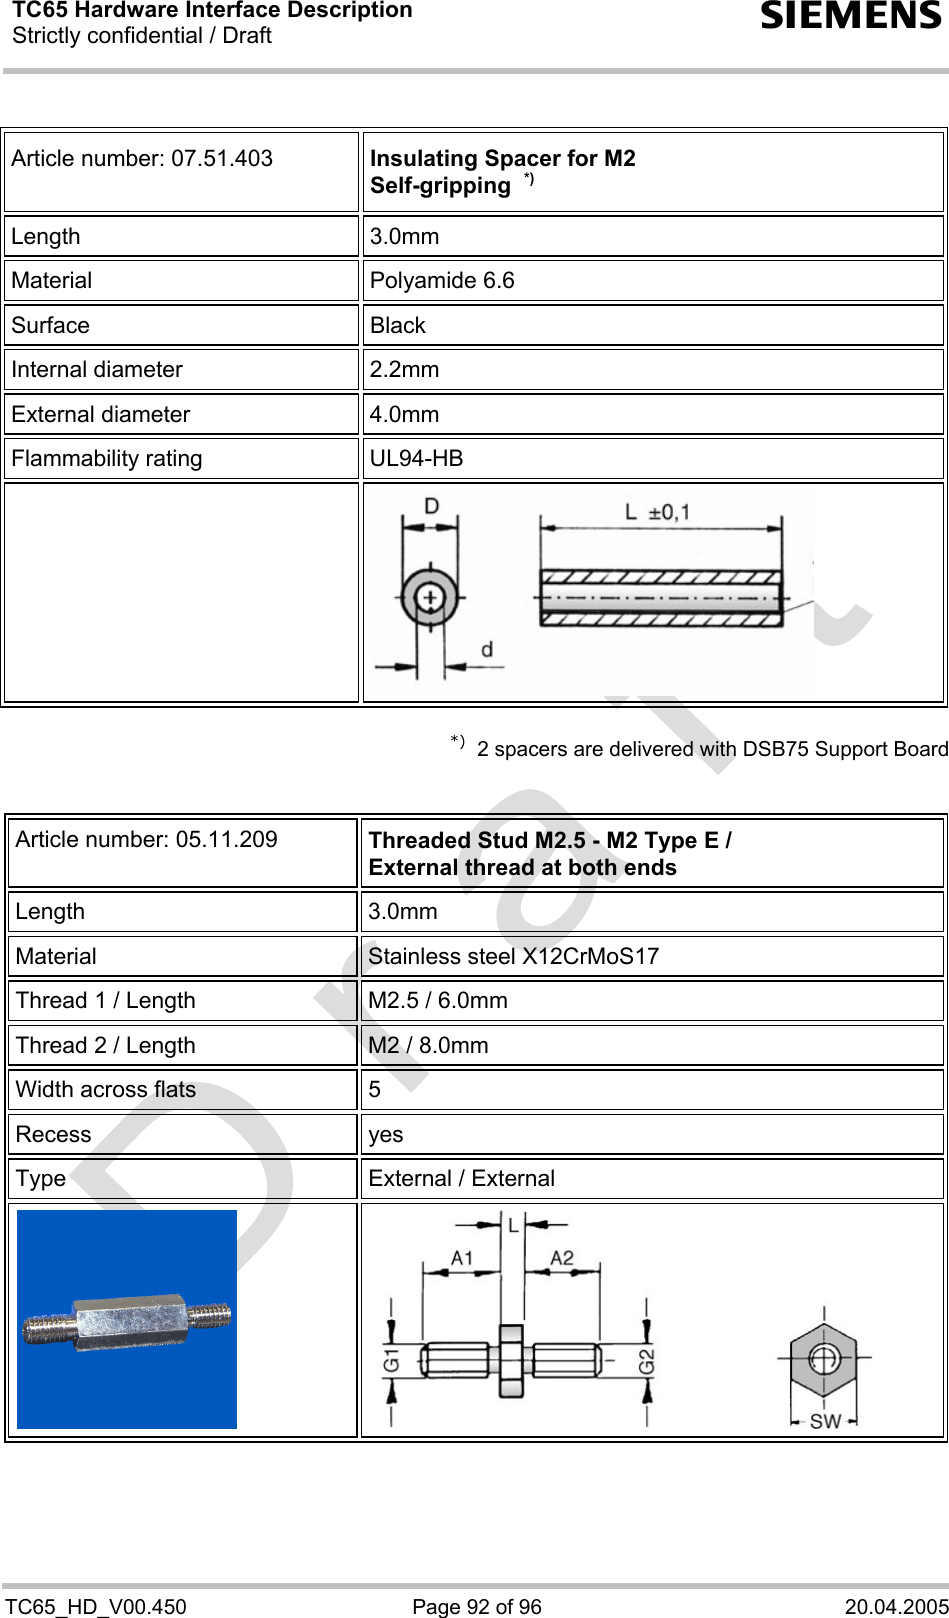 TC65 Hardware Interface Description Strictly confidential / Draft  s TC65_HD_V00.450  Page 92 of 96  20.04.2005  Article number: 07.51.403  Insulating Spacer for M2 Self-gripping  *) Length 3.0mm Material Polyamide 6.6 Surface Black Internal diameter  2.2mm External diameter  4.0mm Flammability rating  UL94-HB    *)  2 spacers are delivered with DSB75 Support Board   Article number: 05.11.209   Threaded Stud M2.5 - M2 Type E / External thread at both ends Length 3.0mm Material  Stainless steel X12CrMoS17 Thread 1 / Length  M2.5 / 6.0mm Thread 2 / Length  M2 / 8.0mm Width across flats  5  Recess yes Type  External / External     